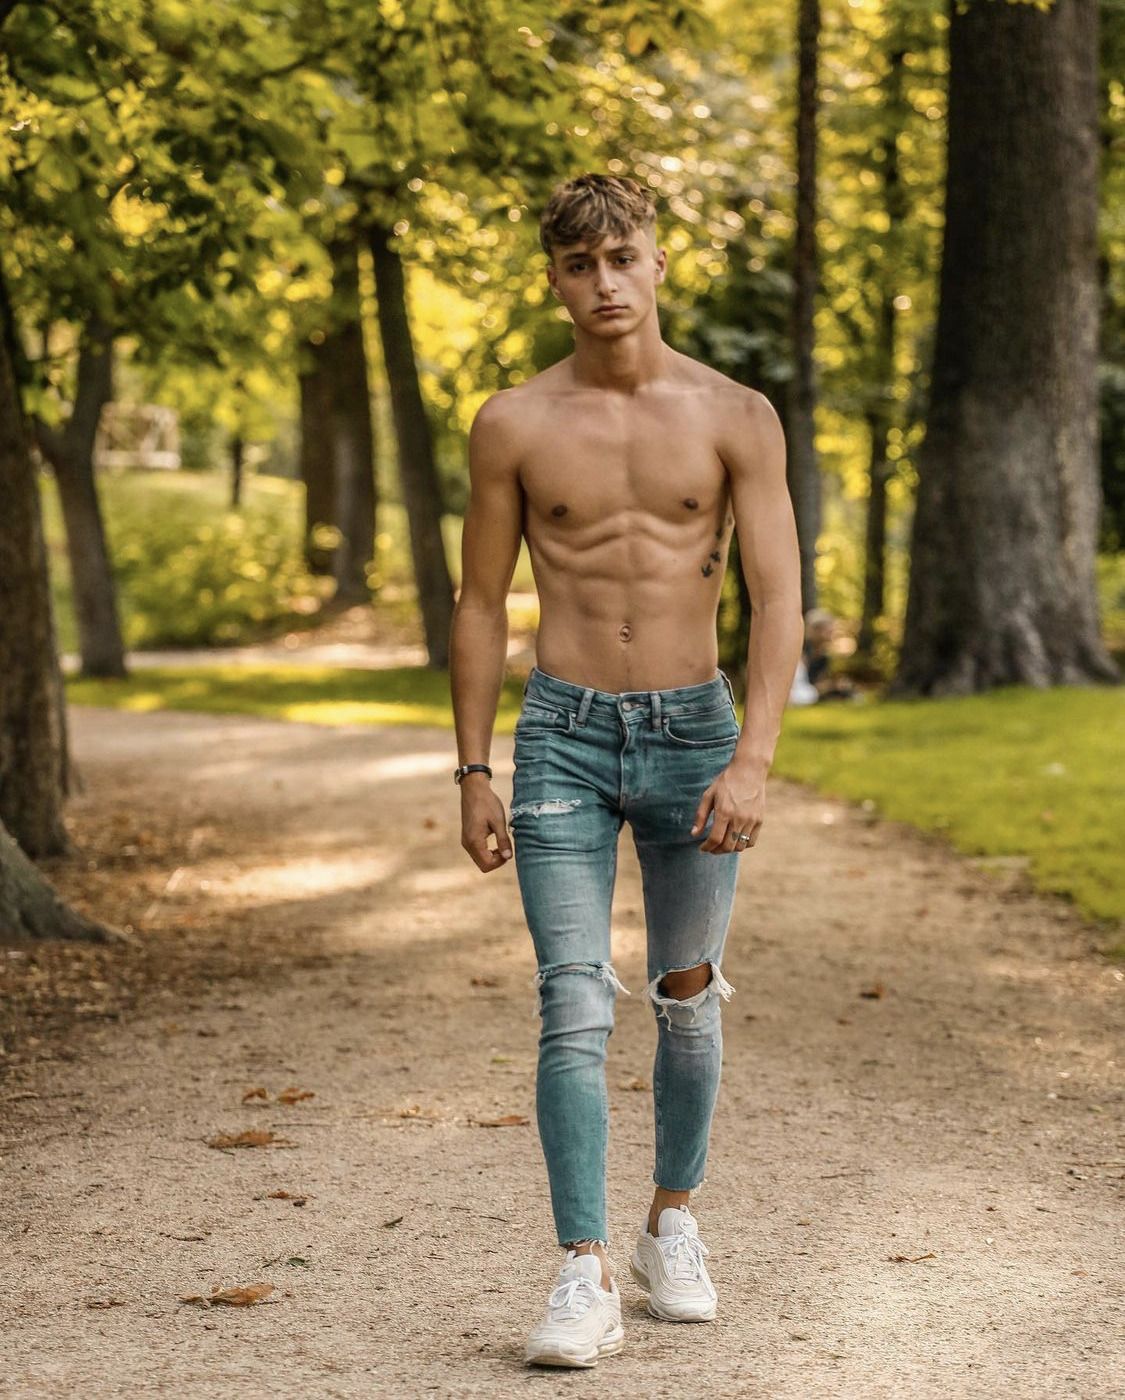 Skinny Jeans is not only for women